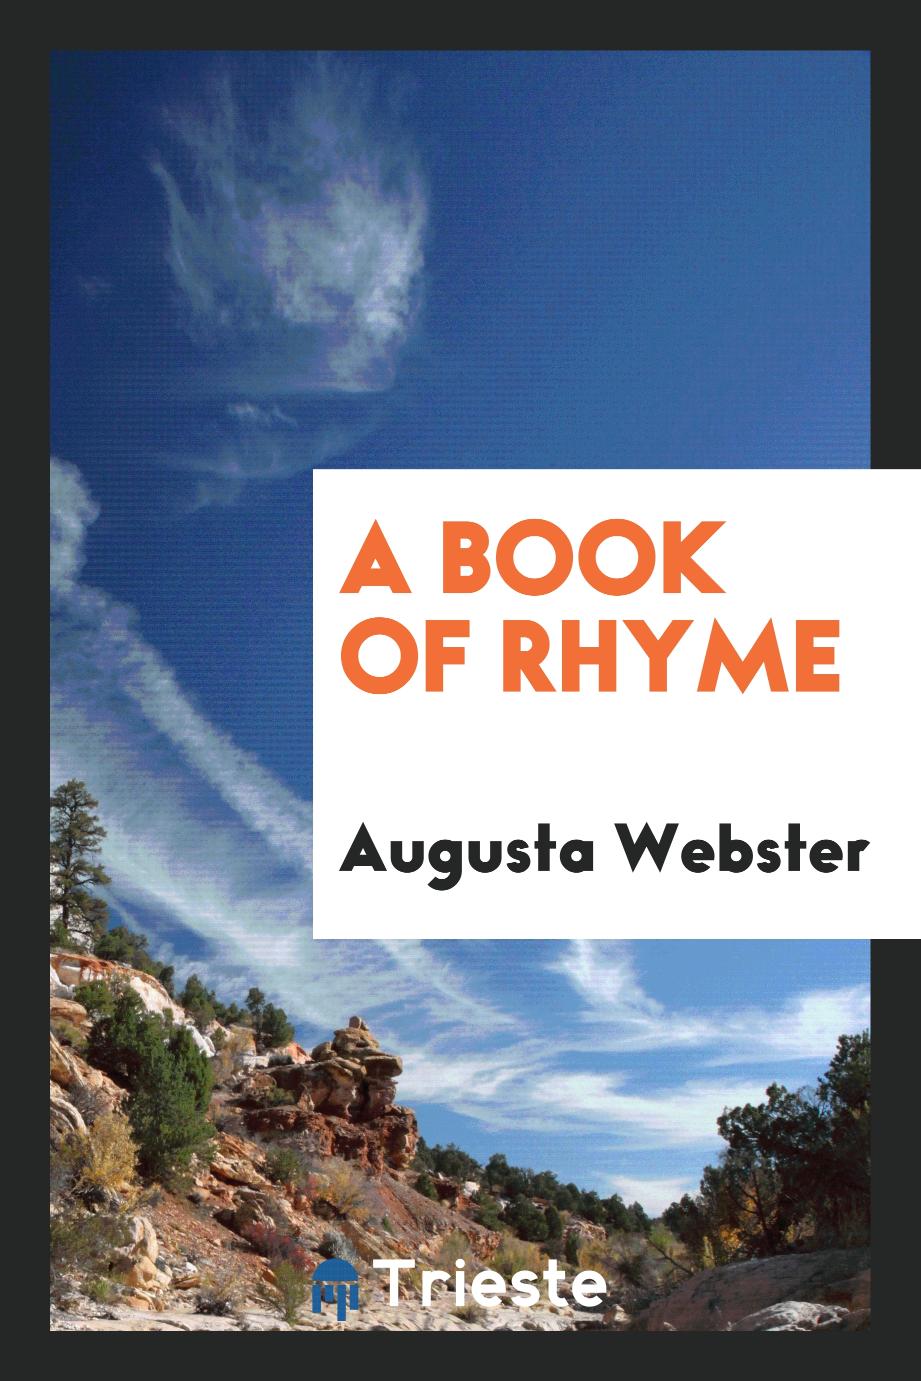 Augusta Webster - A Book of Rhyme